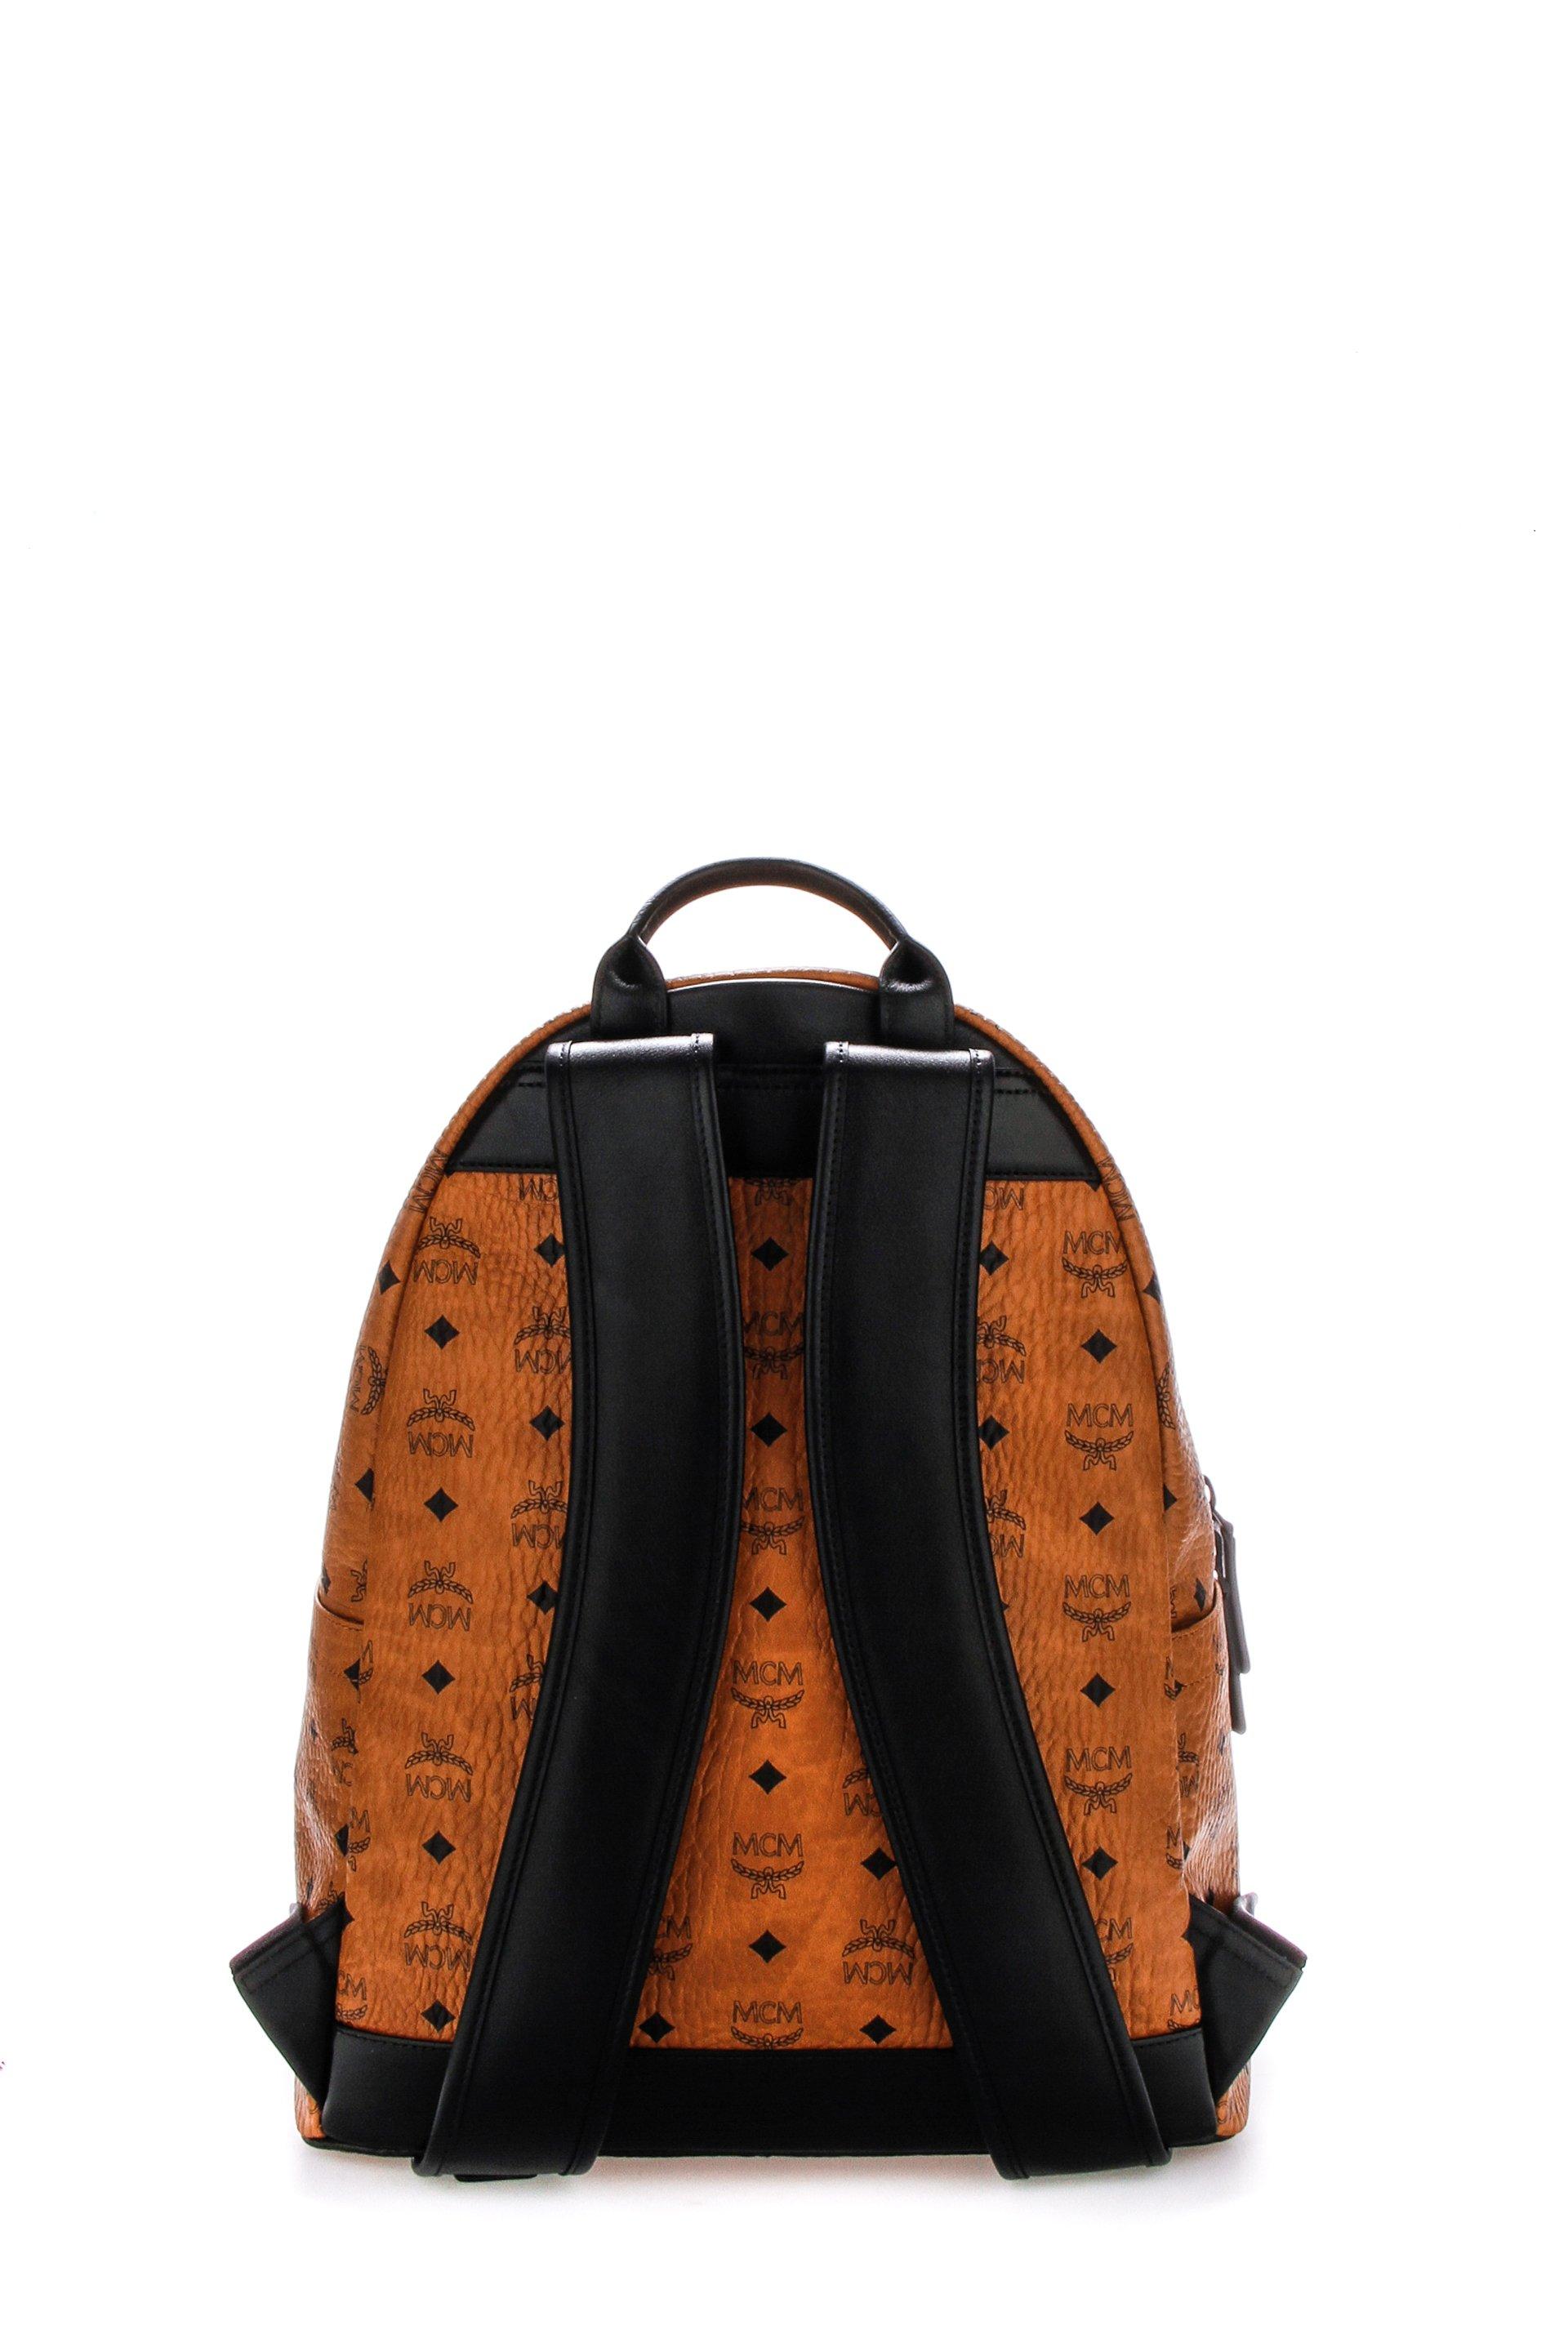 mcm brand what does it stand for Online Sale